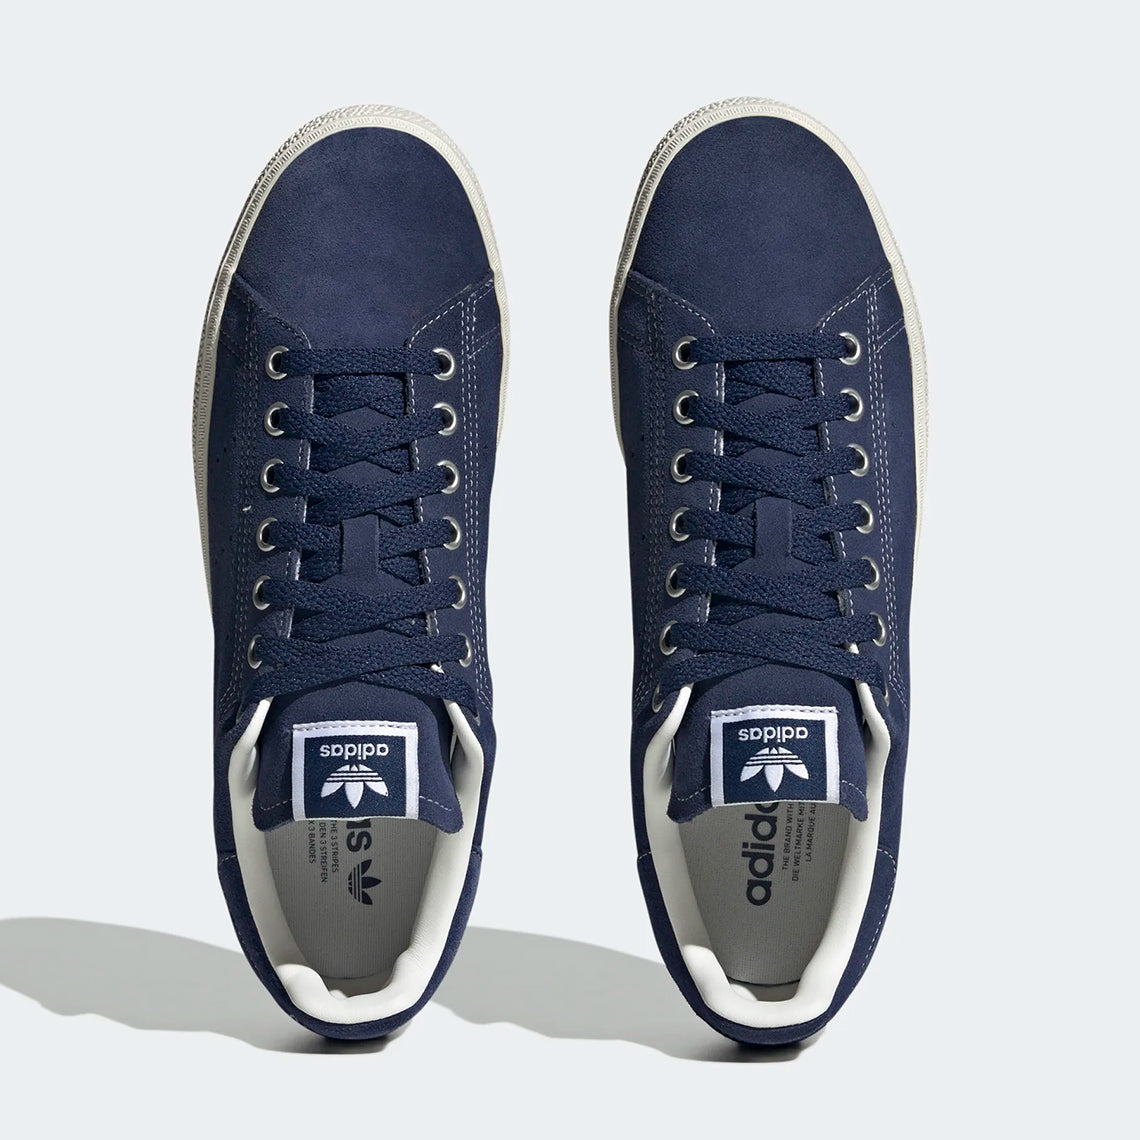 The adidas Stan Smith CS Takes On A Suede “Dark Blue” Upper